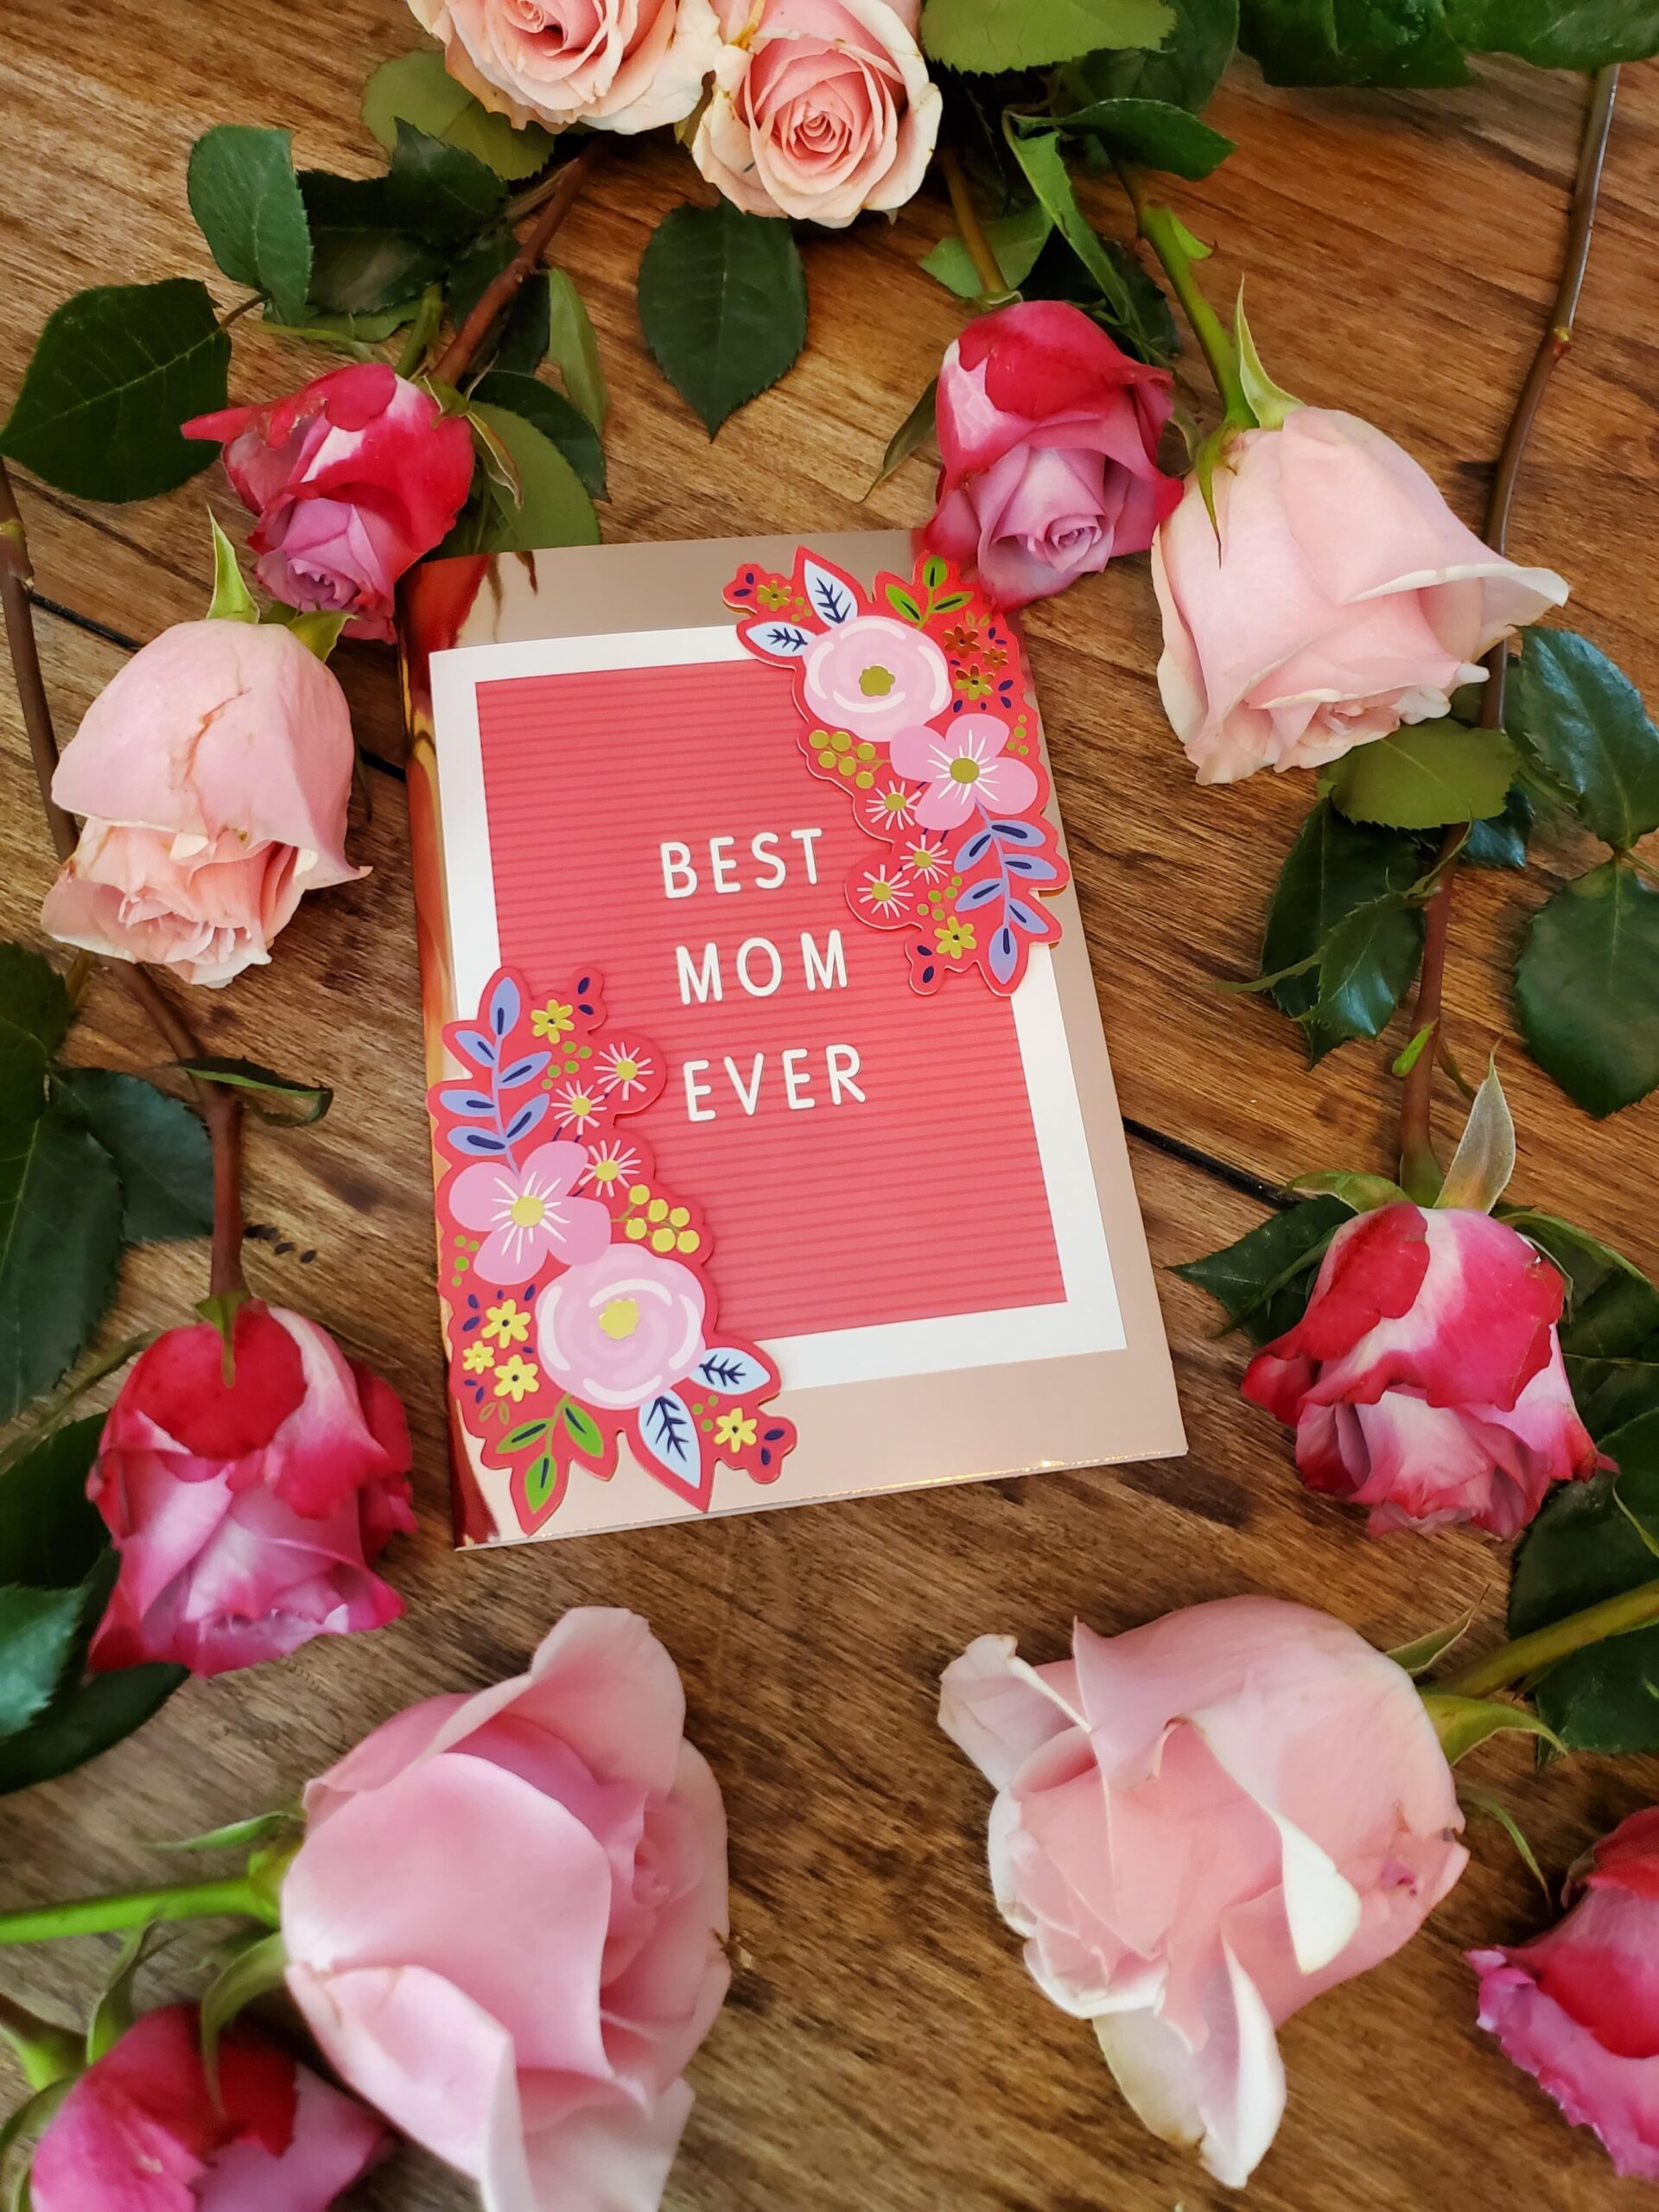 An image of a Mother's Day card.